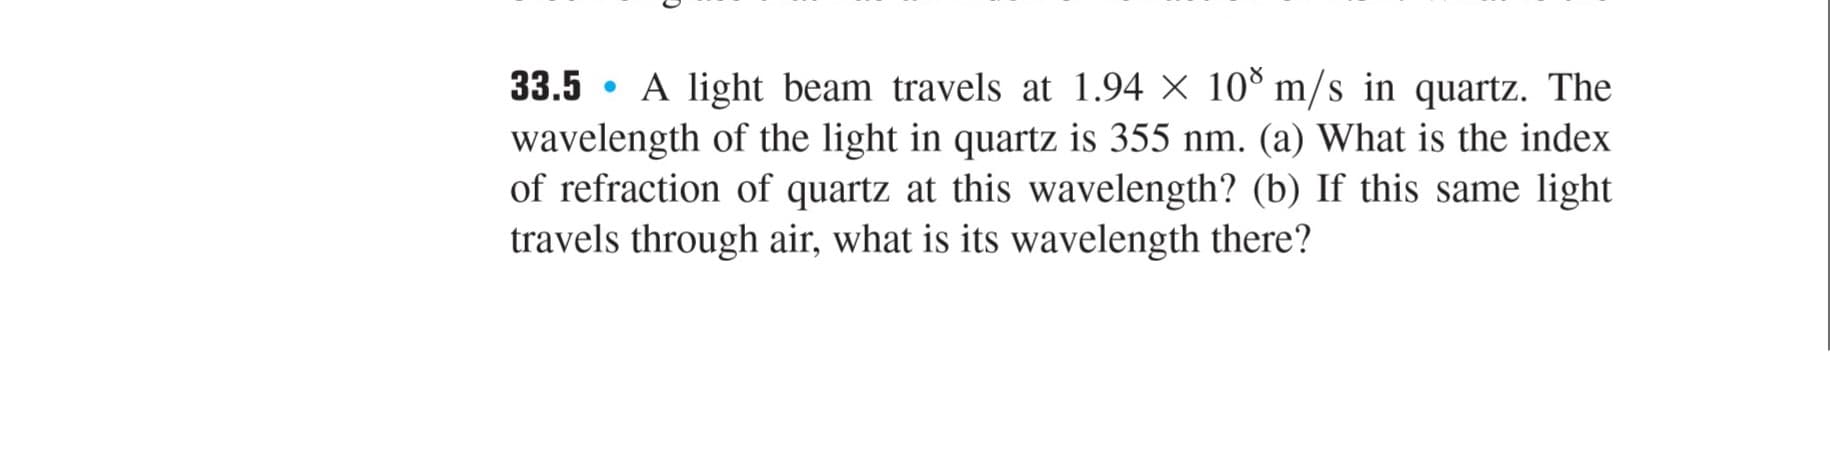 33.5 • A light beam travels at 1.94 × 10® m/s in quartz. The
wavelength of the light in quartz is 355 nm. (a) What is the index
of refraction of quartz at this wavelength? (b) If this same light
travels through air, what is its wavelength there?
